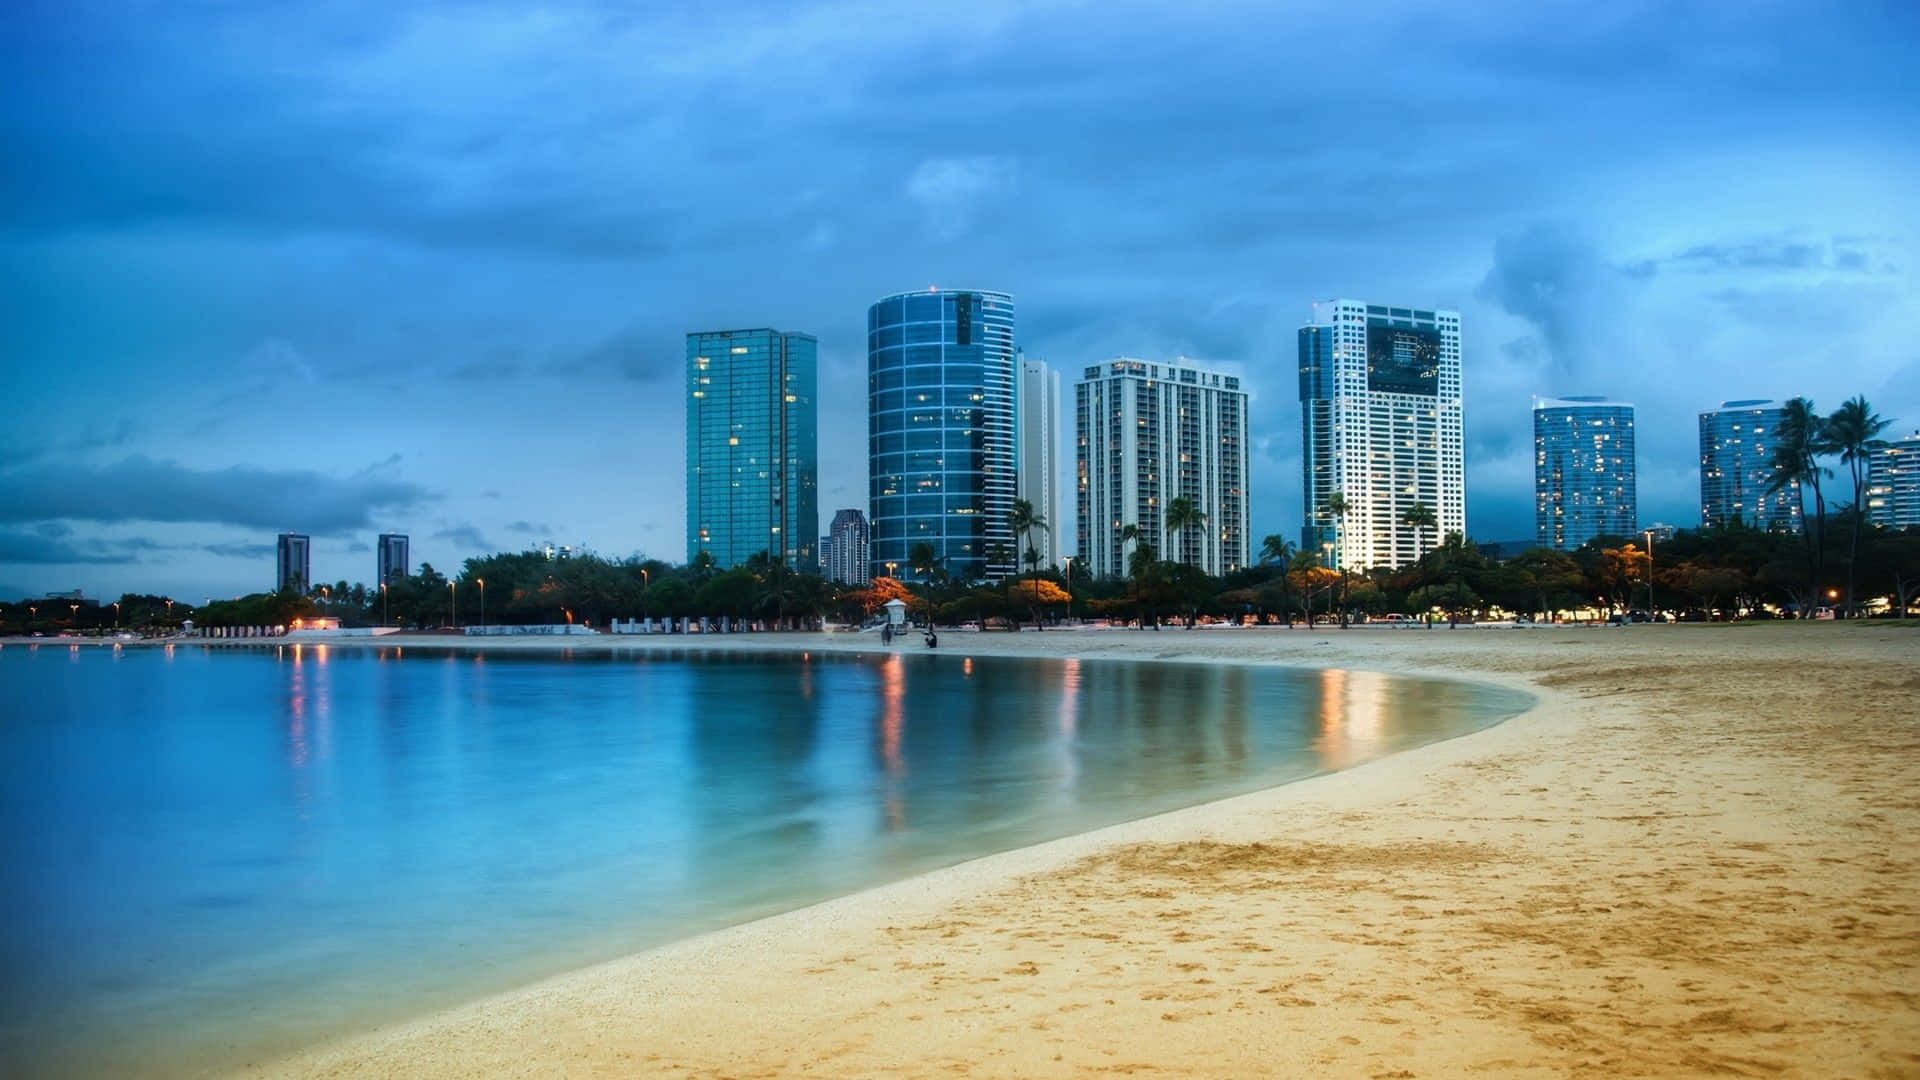 A Beach With Buildings And A Cloudy Sky